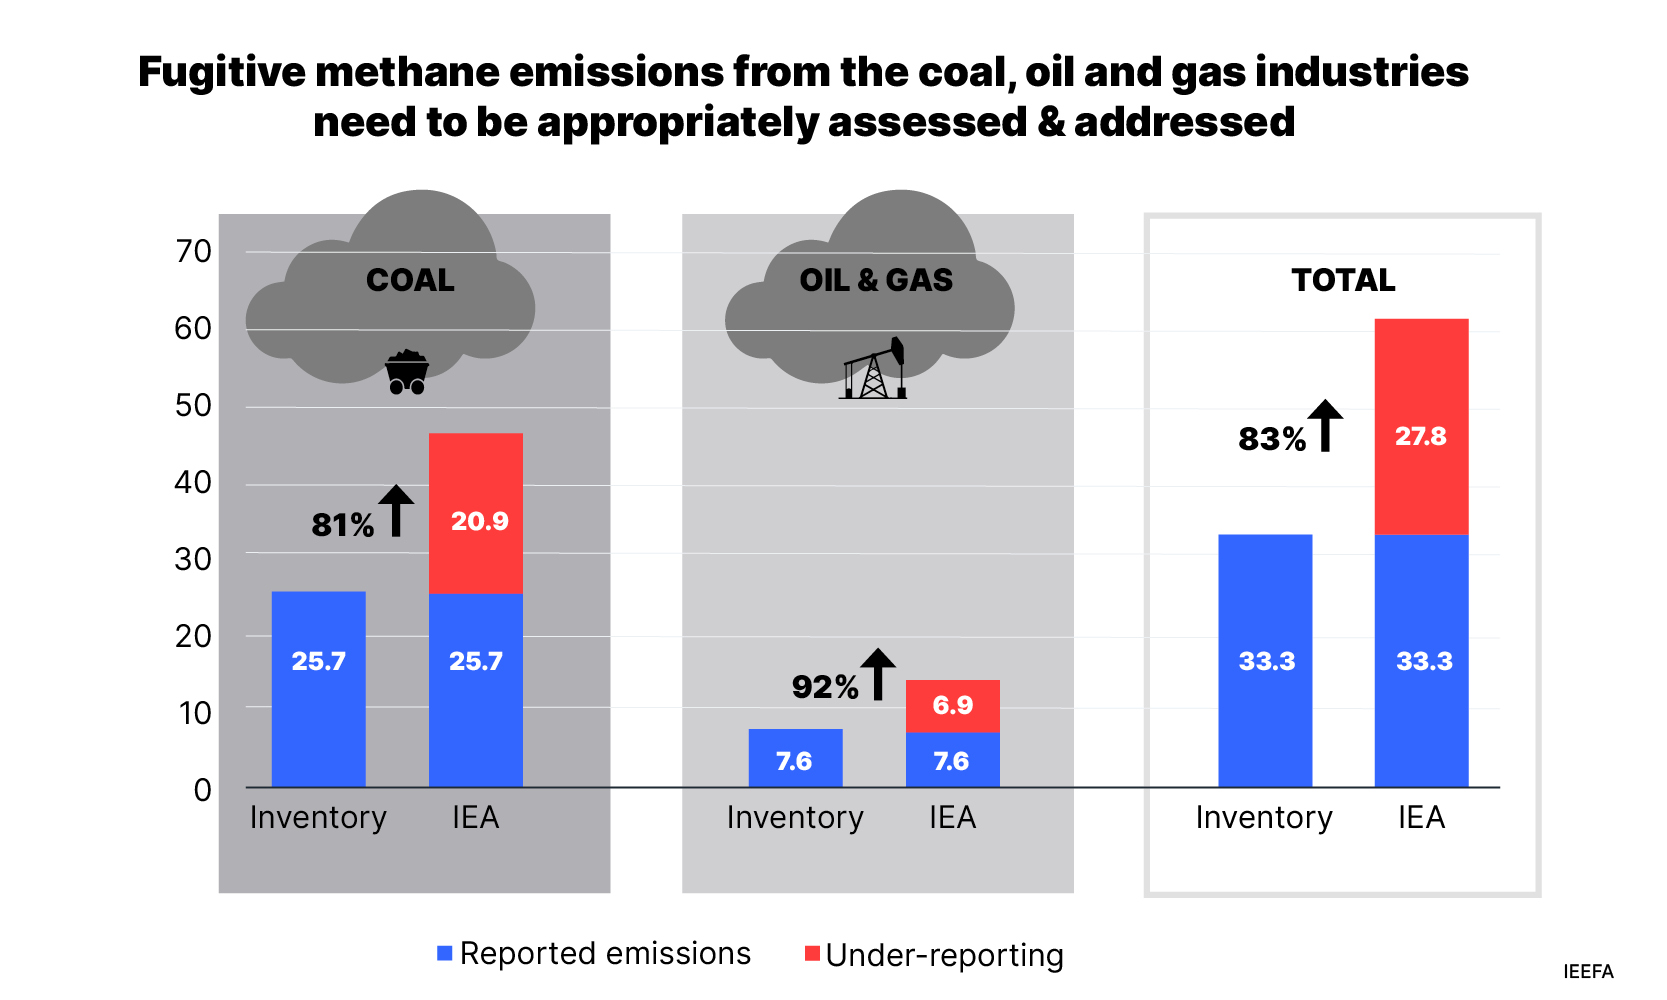 Fugitive emissions from the coal, oil and gas industries